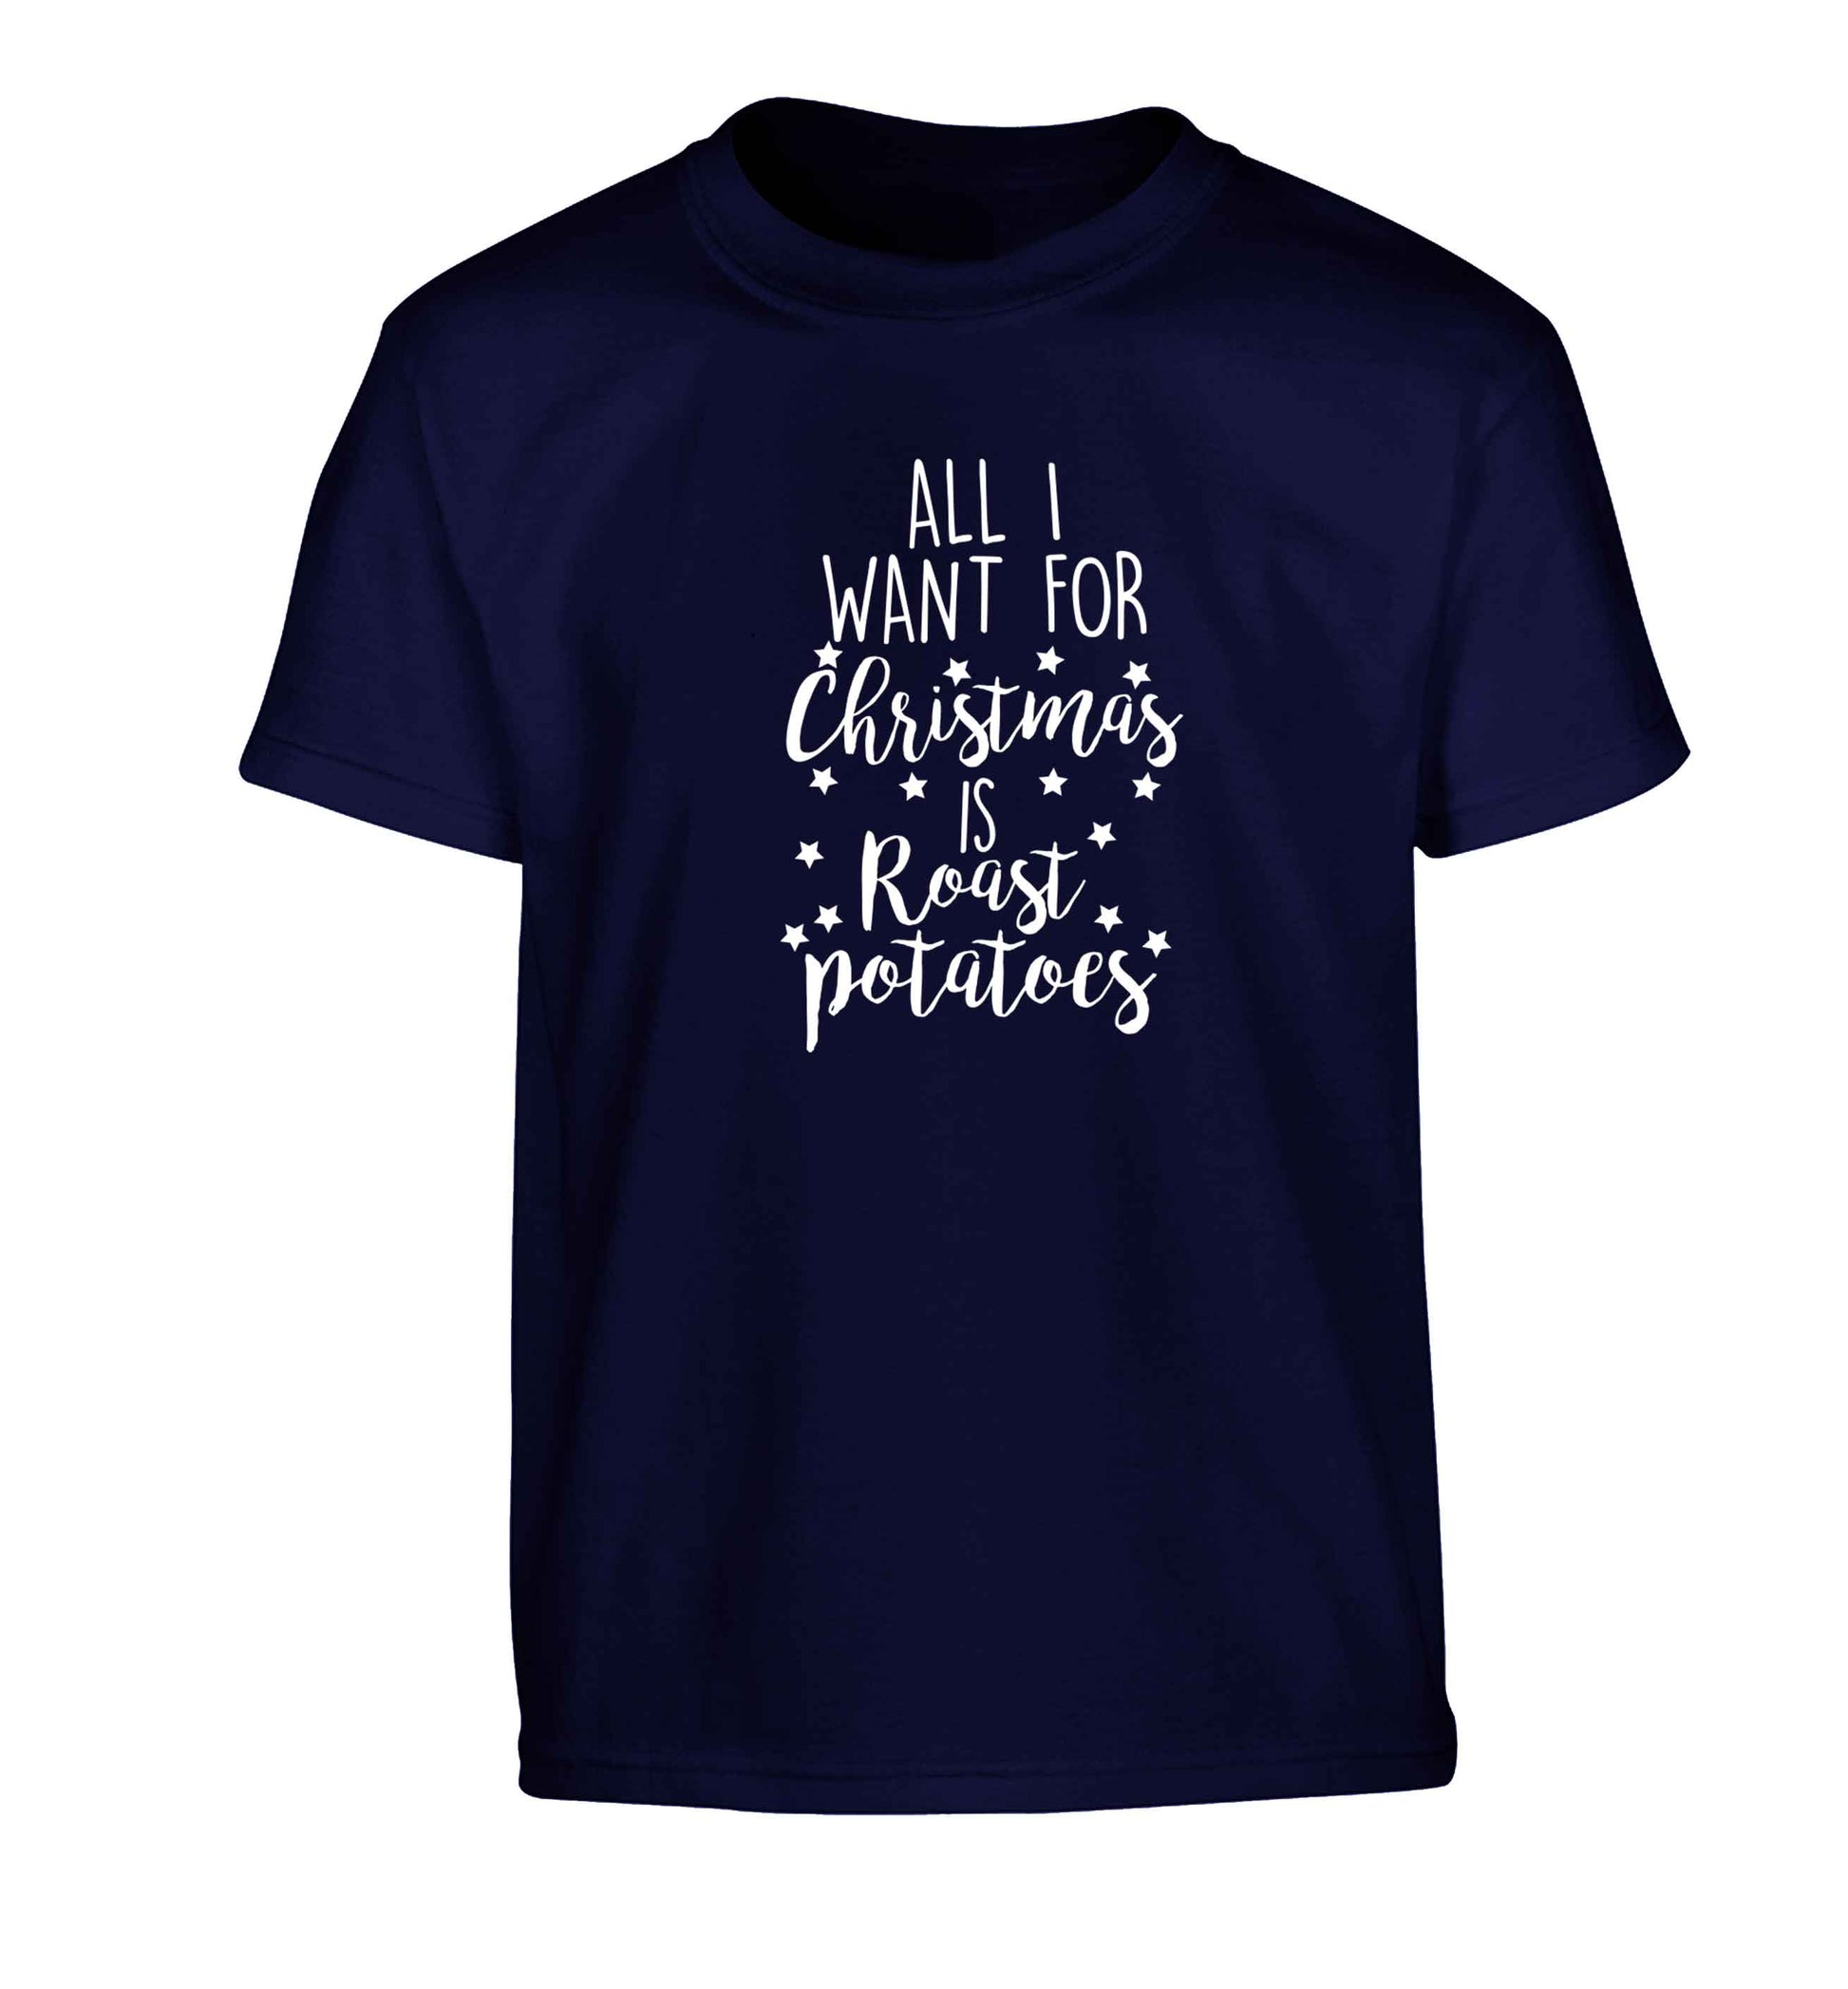 All I want for Christmas is roast potatoes Children's navy Tshirt 12-13 Years